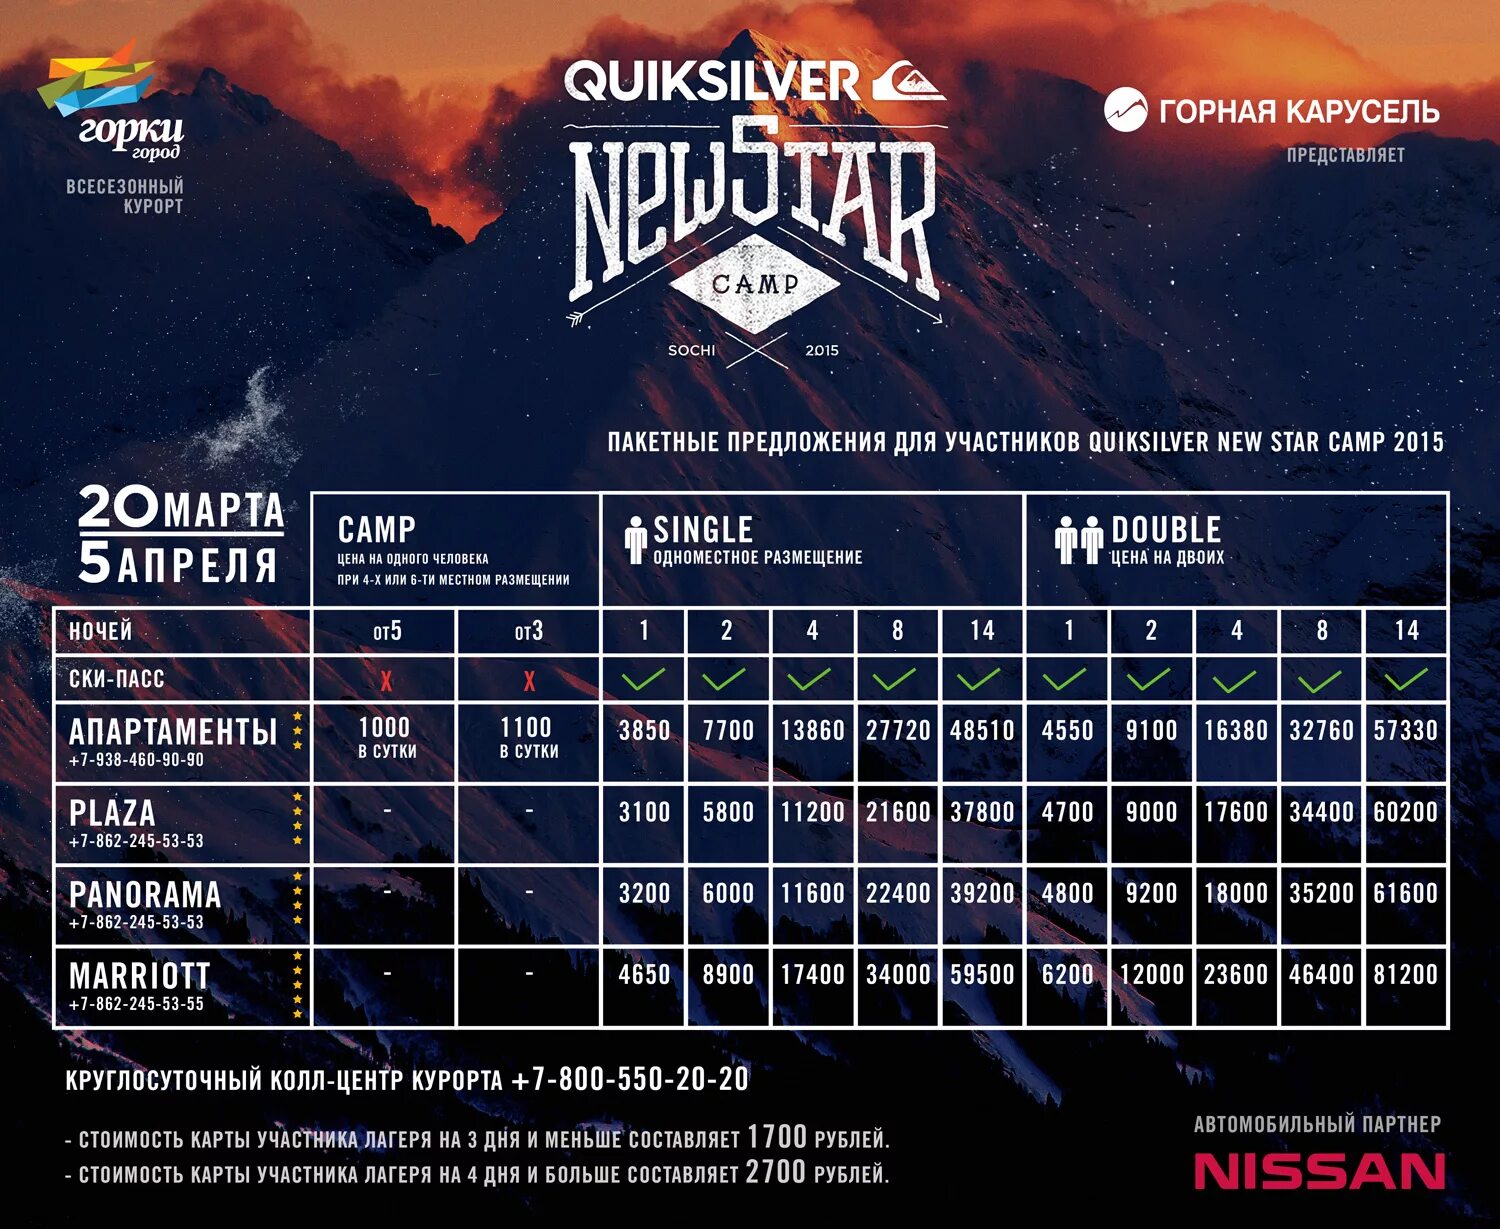 New star videos. Quiksilver New Star Camp. New Star Camp 2022. Quicksilver New Camp Star Camp. New Star Camp 2019.